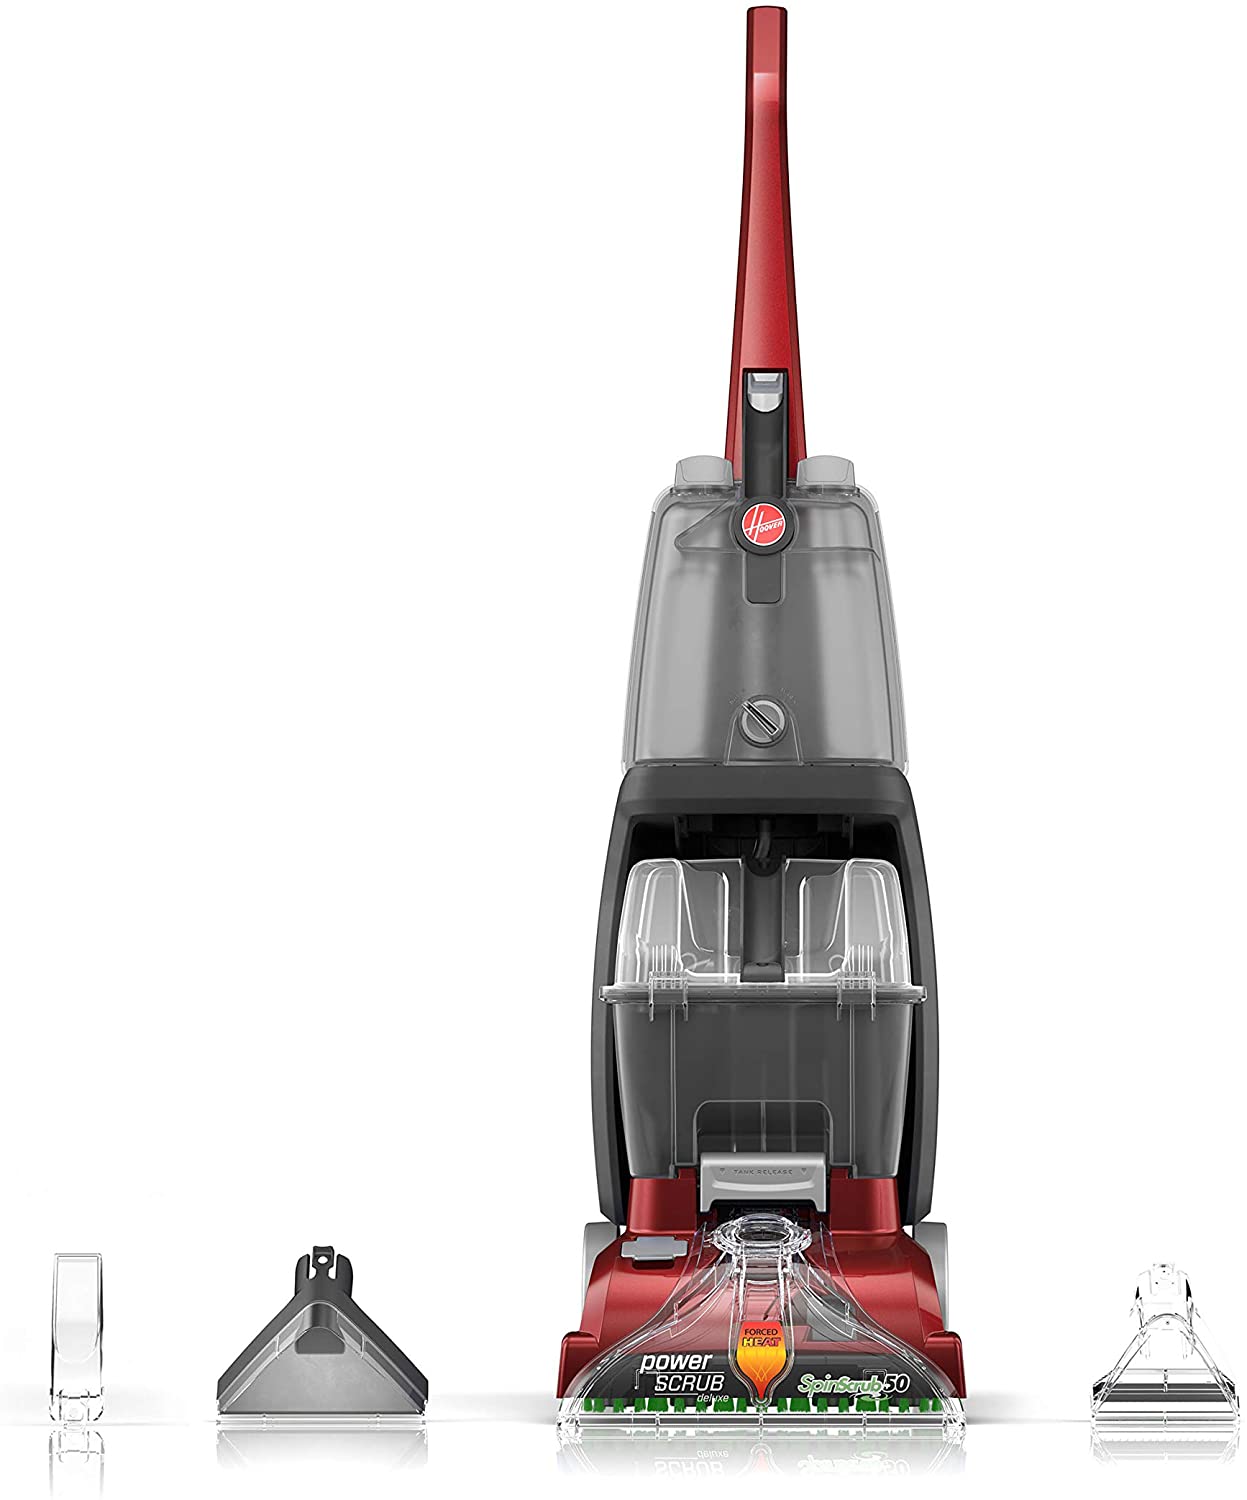 Hoover Power Scrub Deluxe Carpet Cleaner Machine, Upright Shampooer, FH50150, Red - image 1 of 9